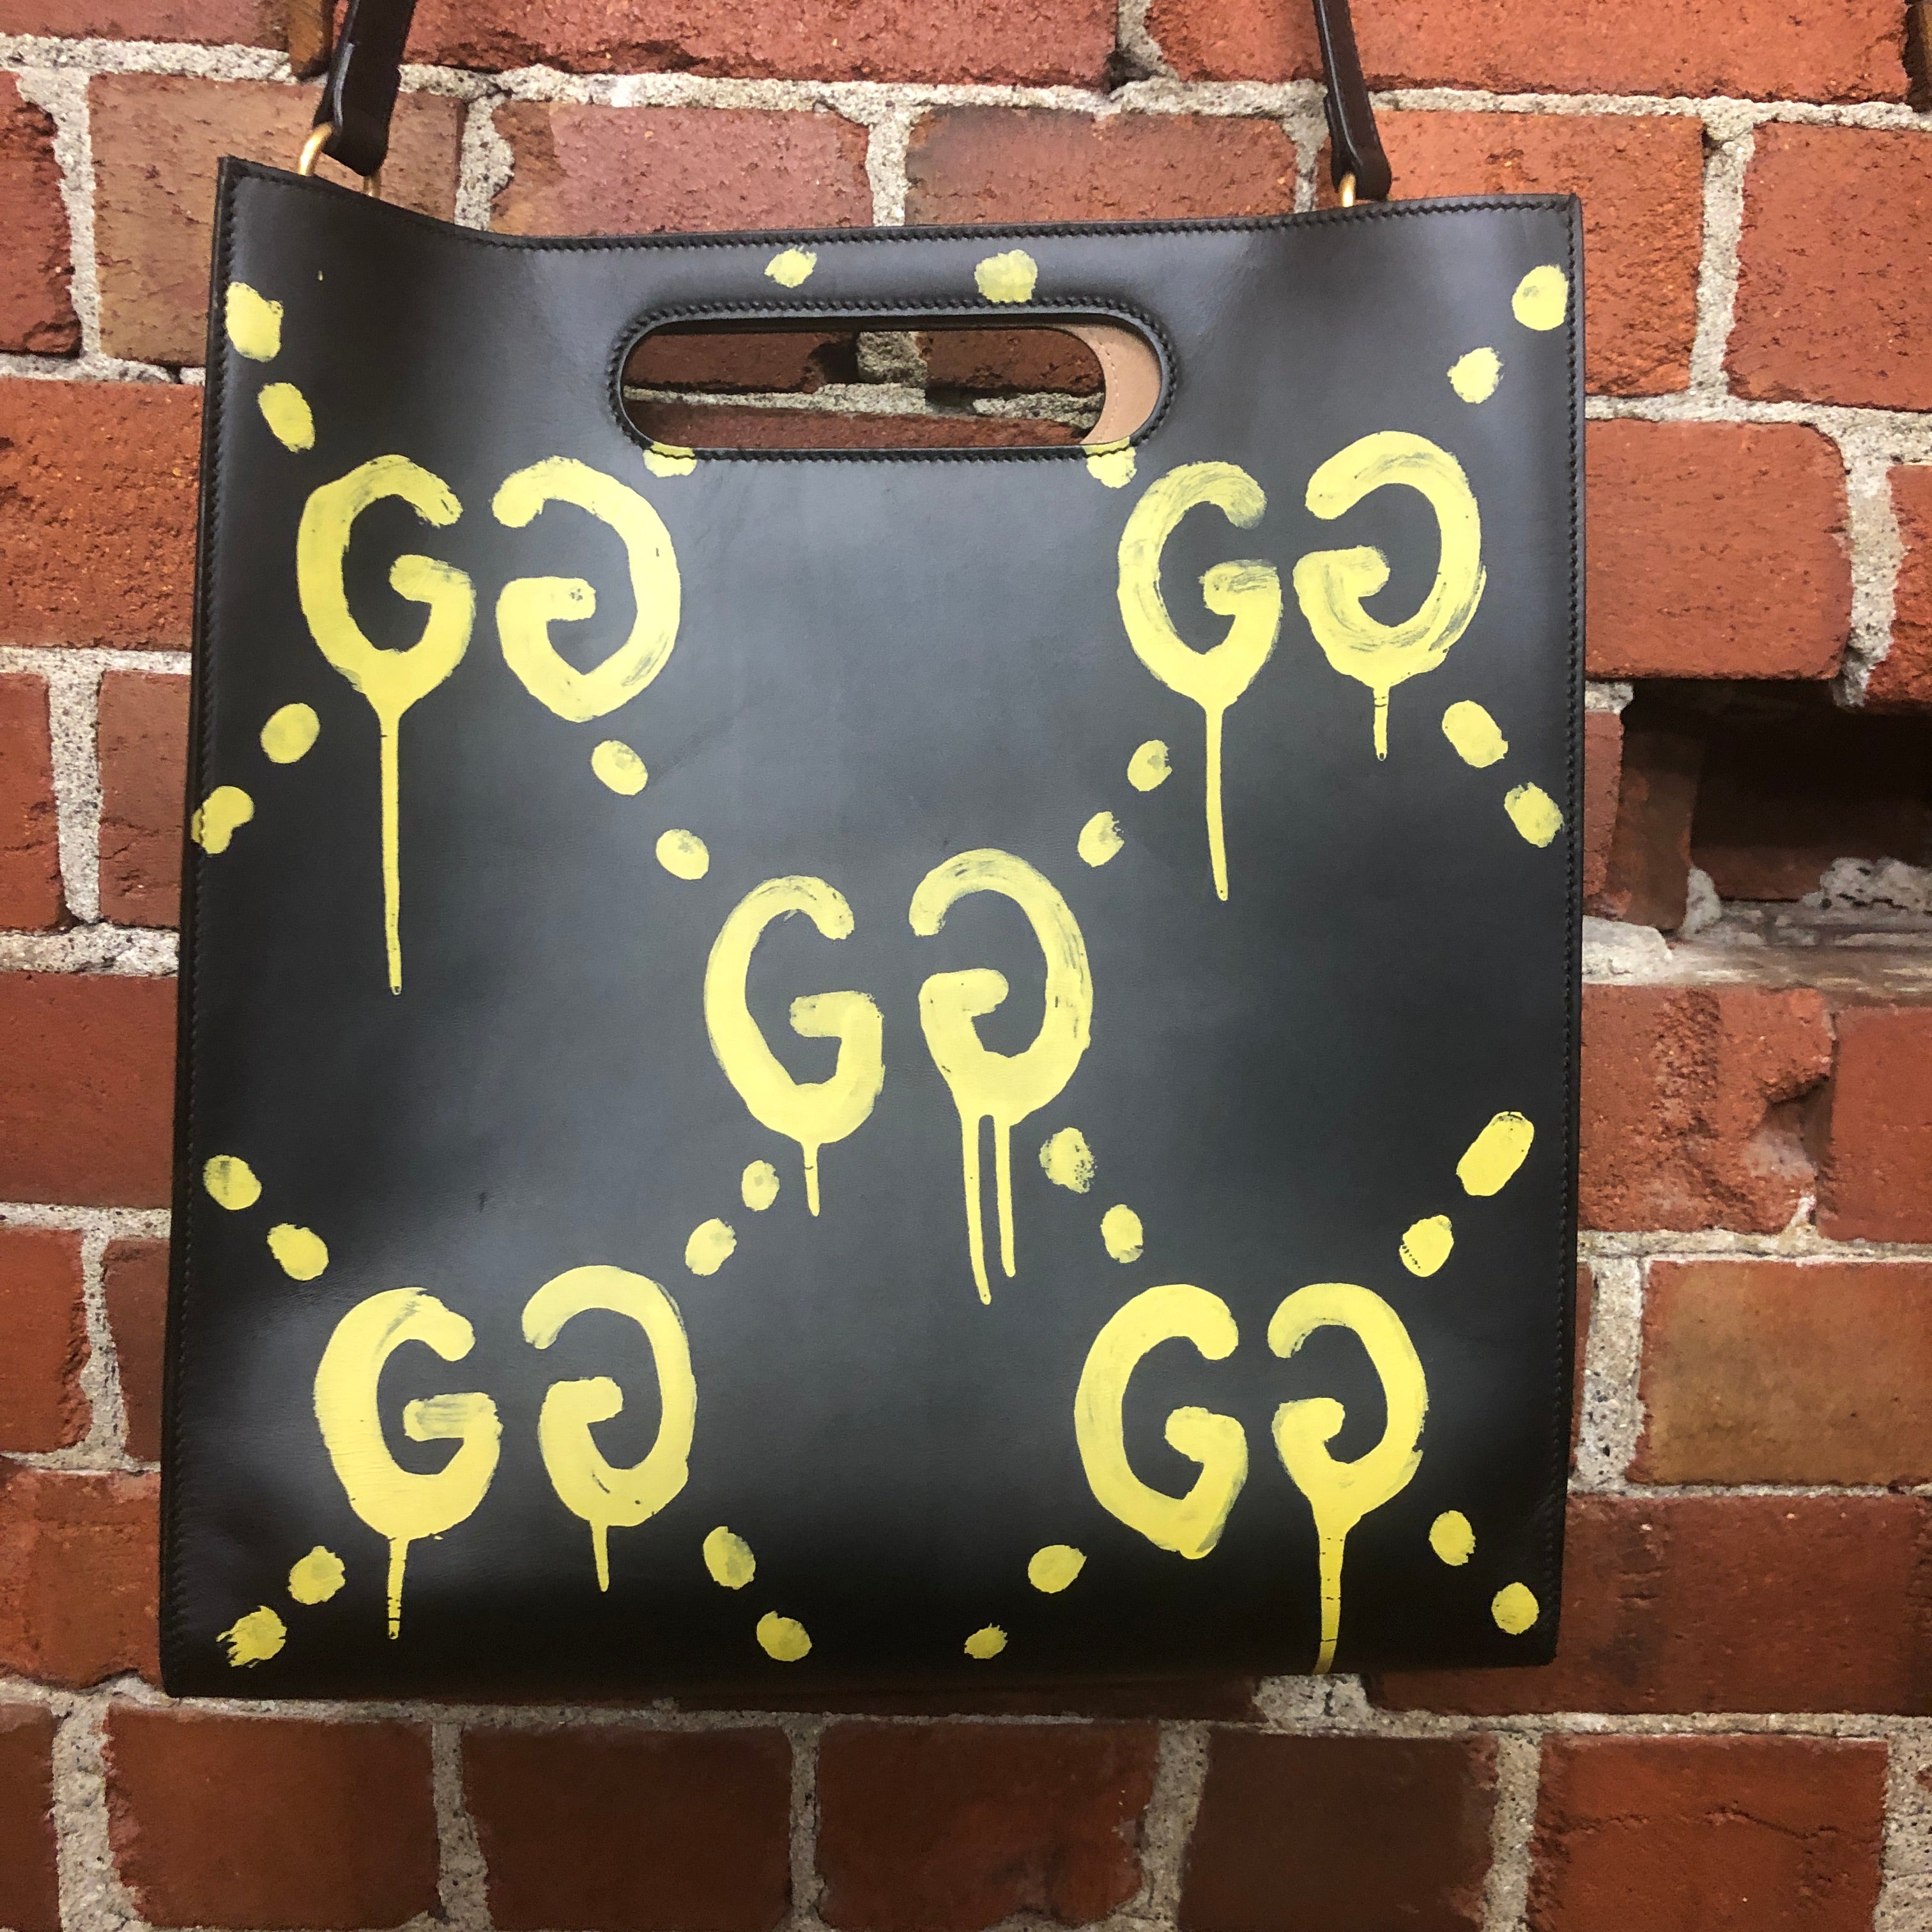 GUCCI GHOST iconic 'REAL GUCCI' leather tote bag